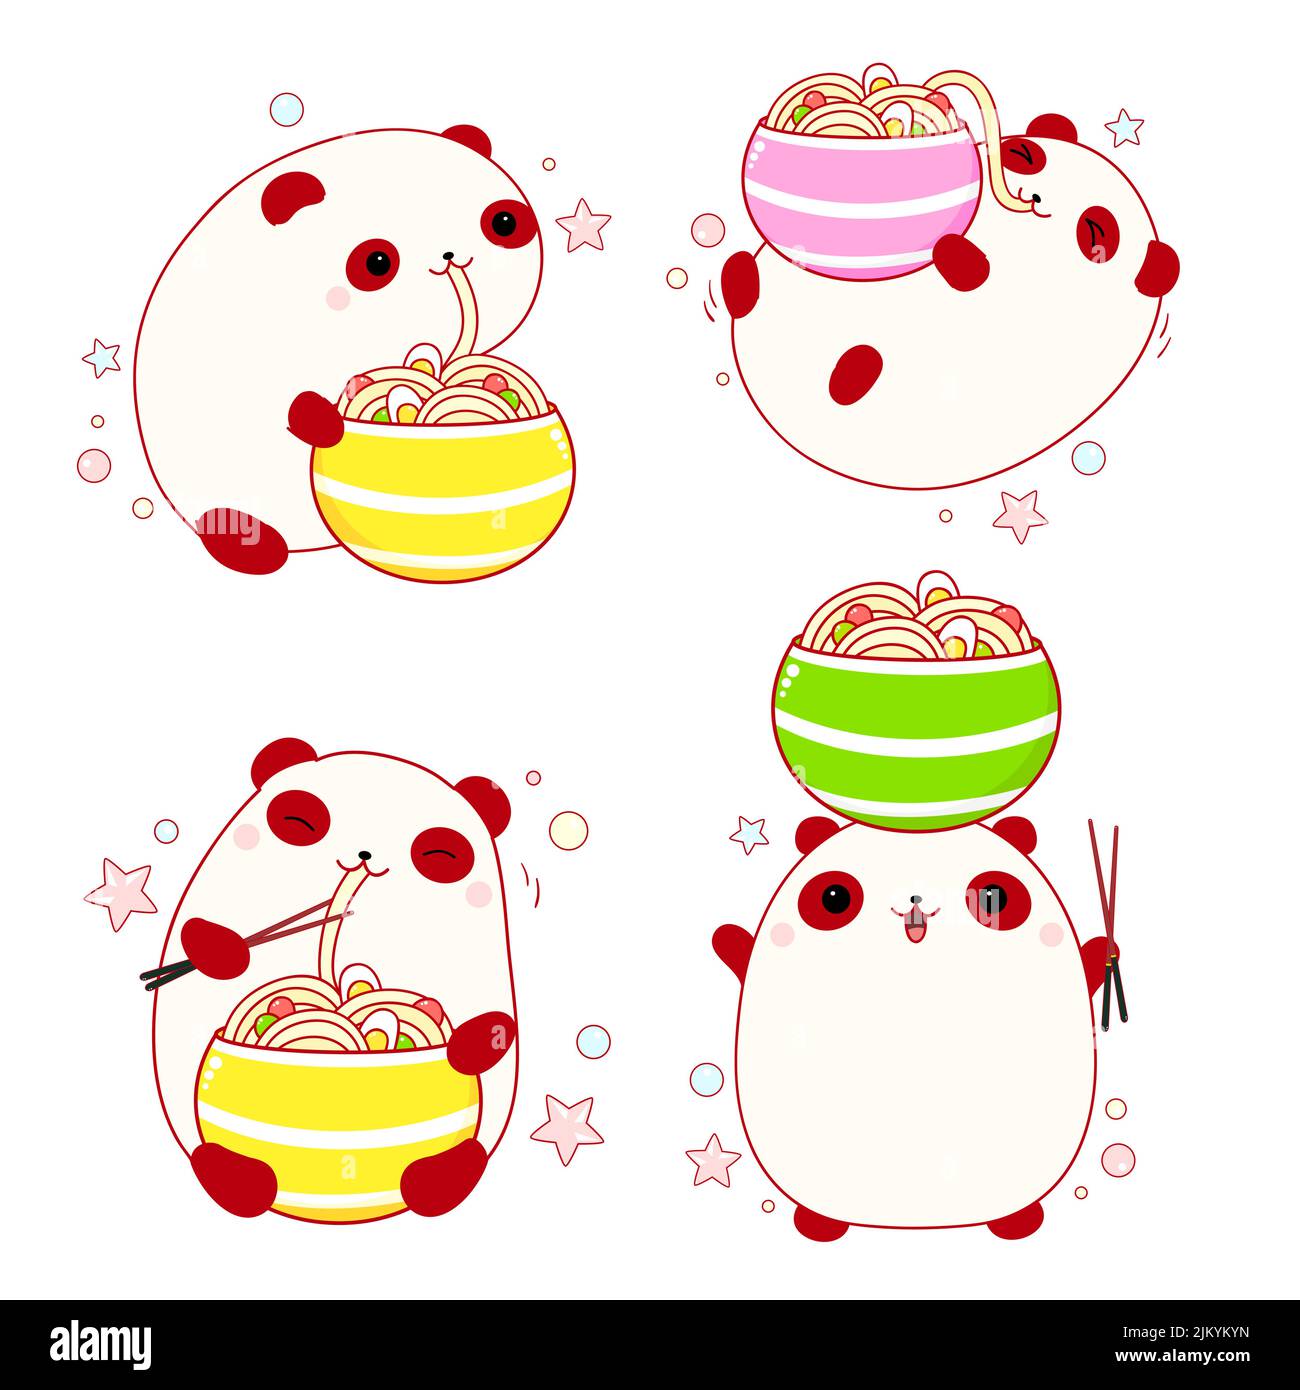 Set of cute animals in kawaii style. Funny fat panda eat ramen noodles. Can be used for t-shirt print, stickers, greeting card. Kawaii little pandas a Stock Vector